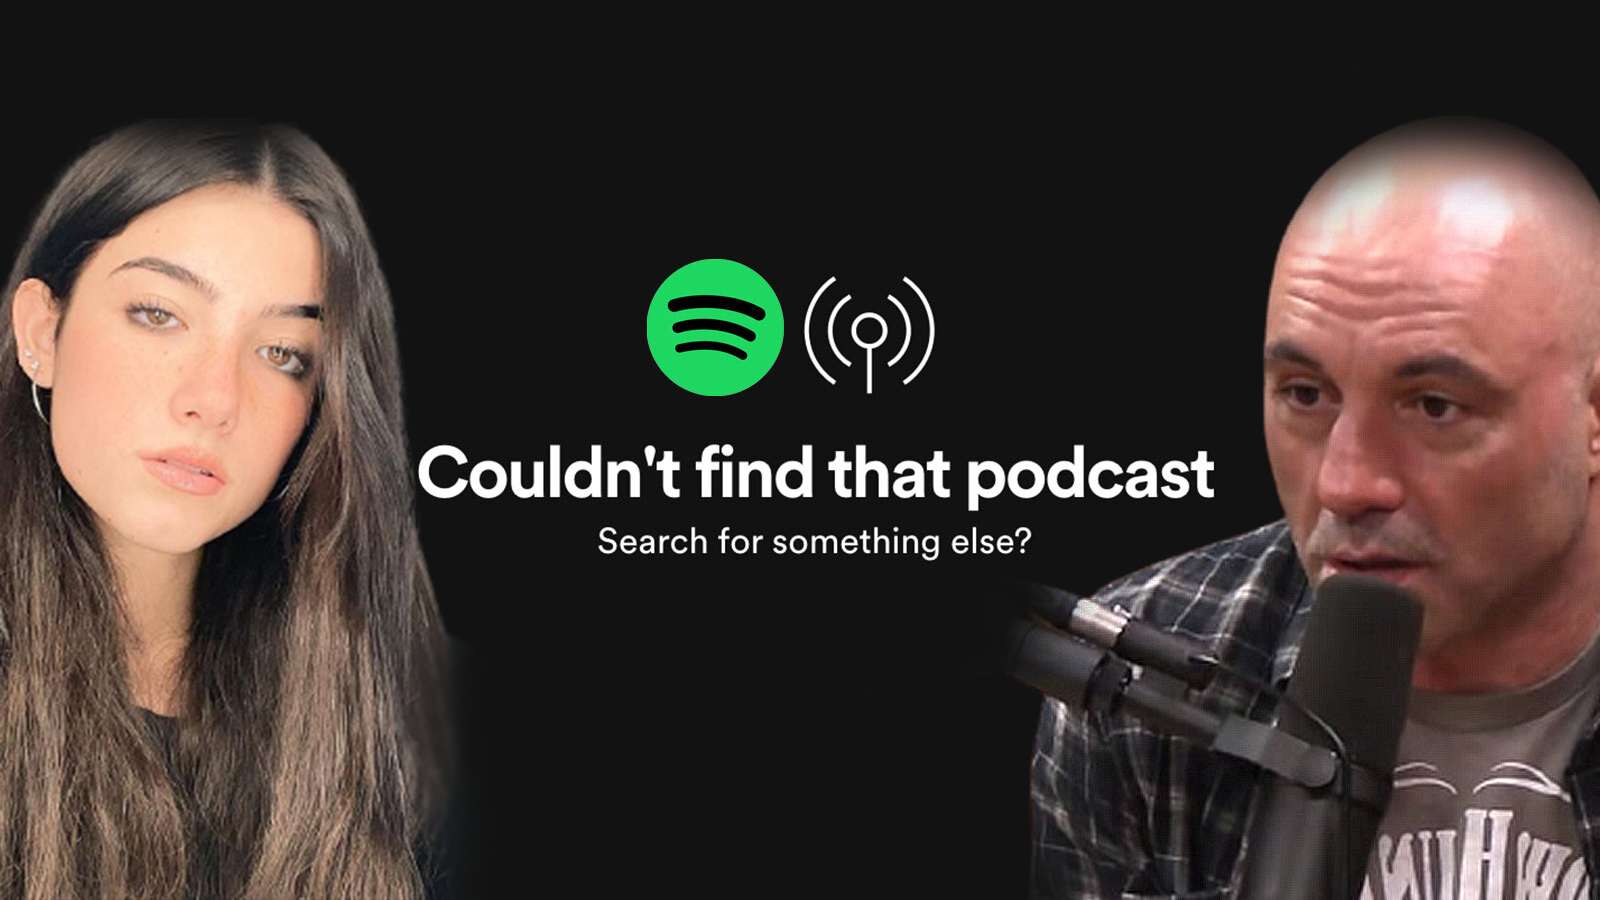 Spotify podcasts down for users